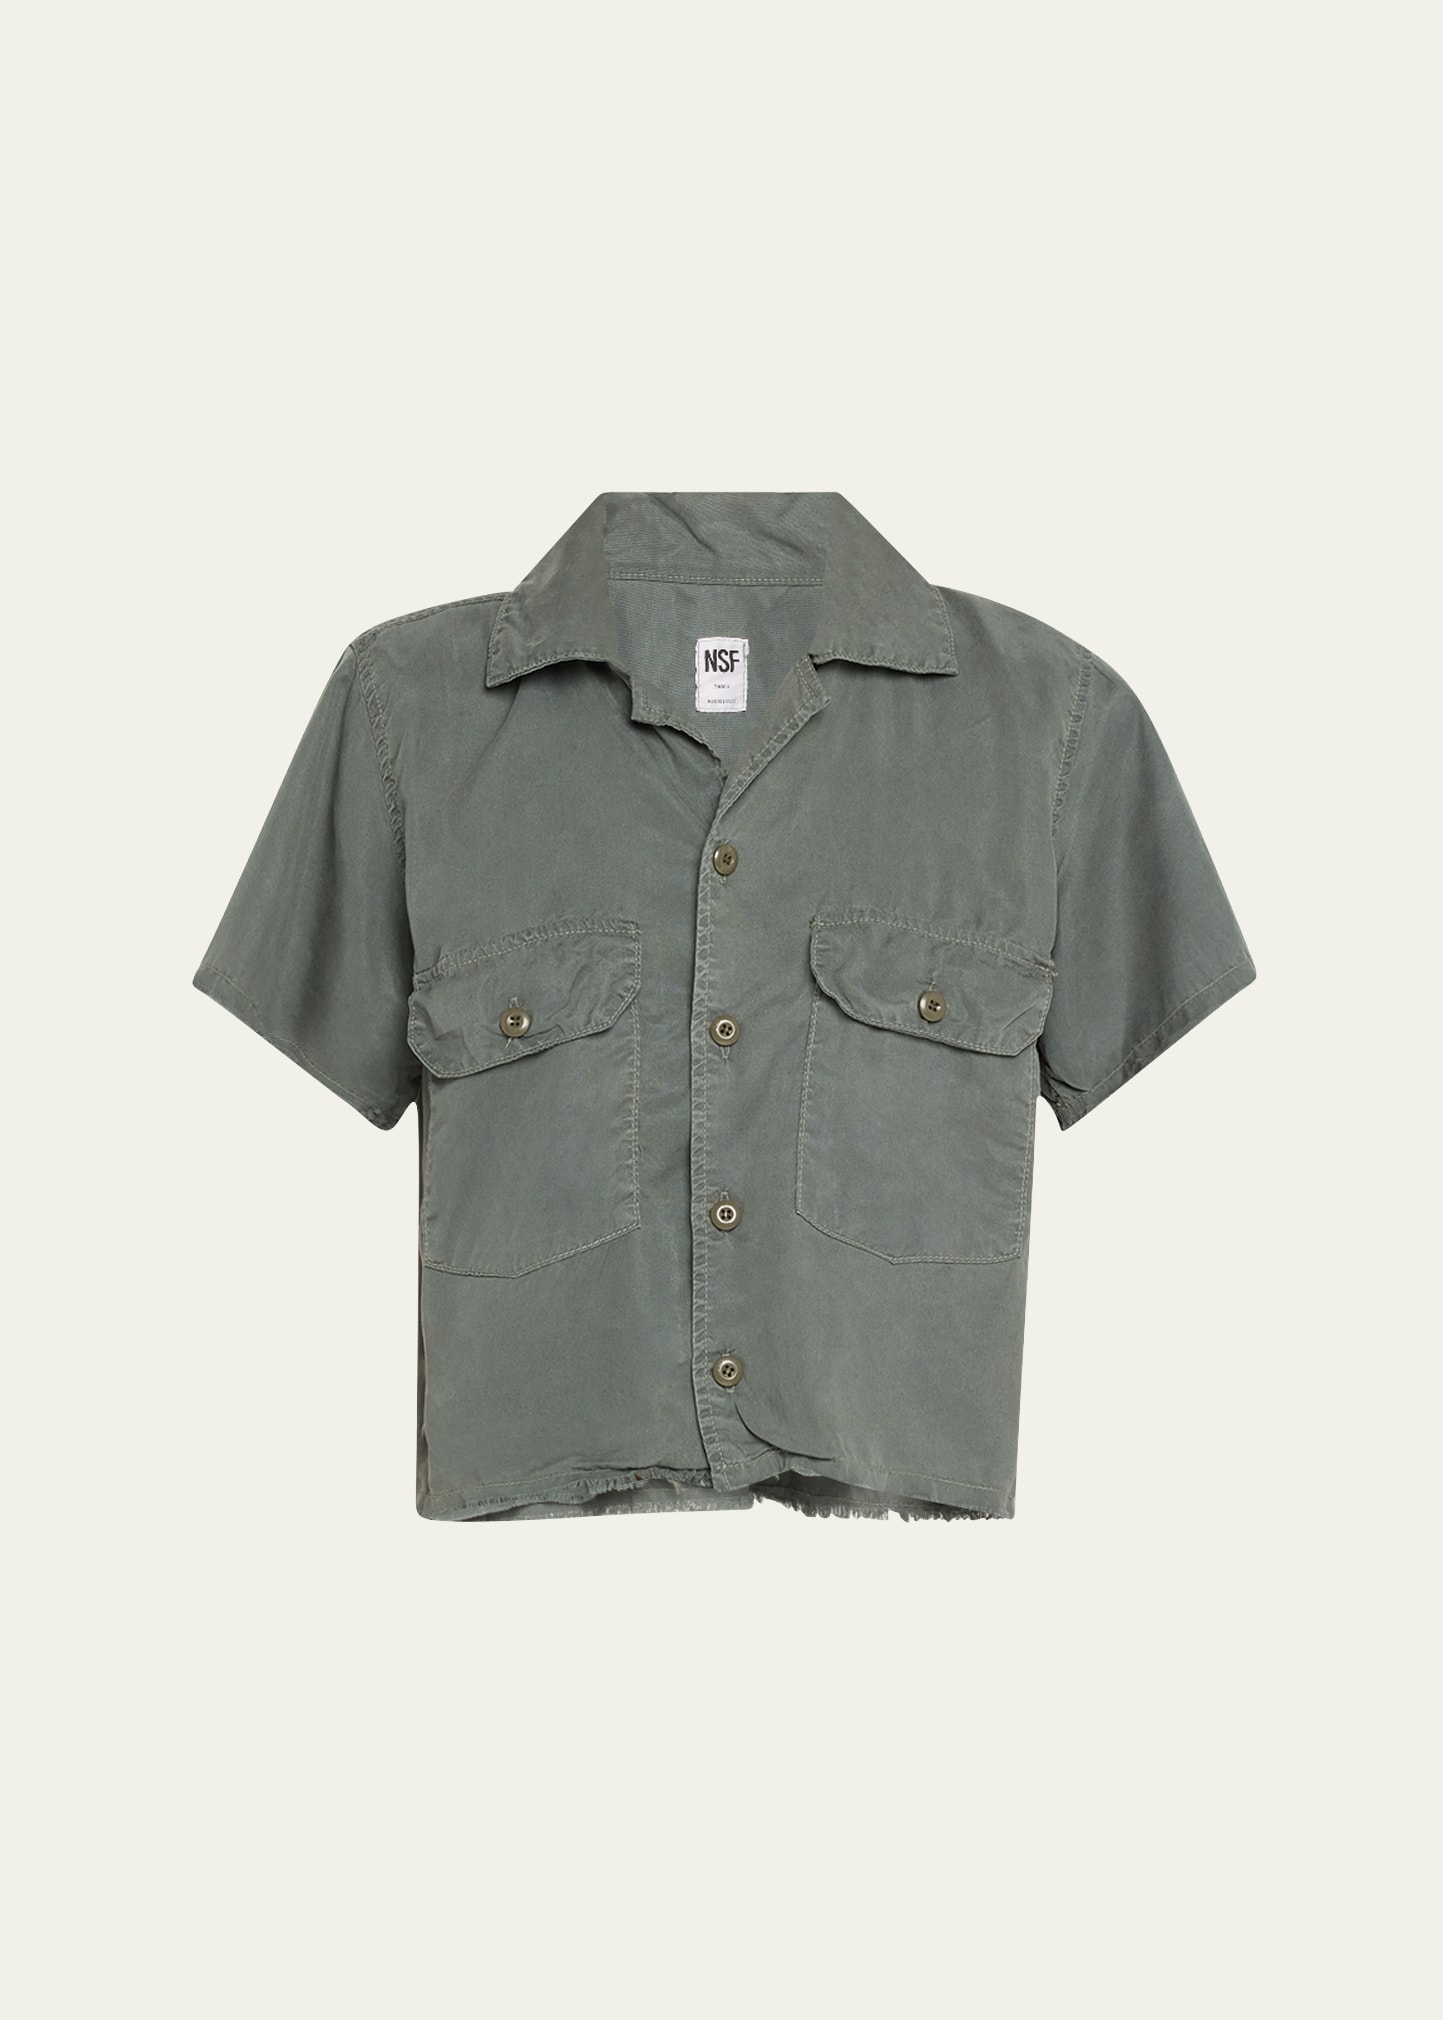 Reese Woven Utility Camp Shirt